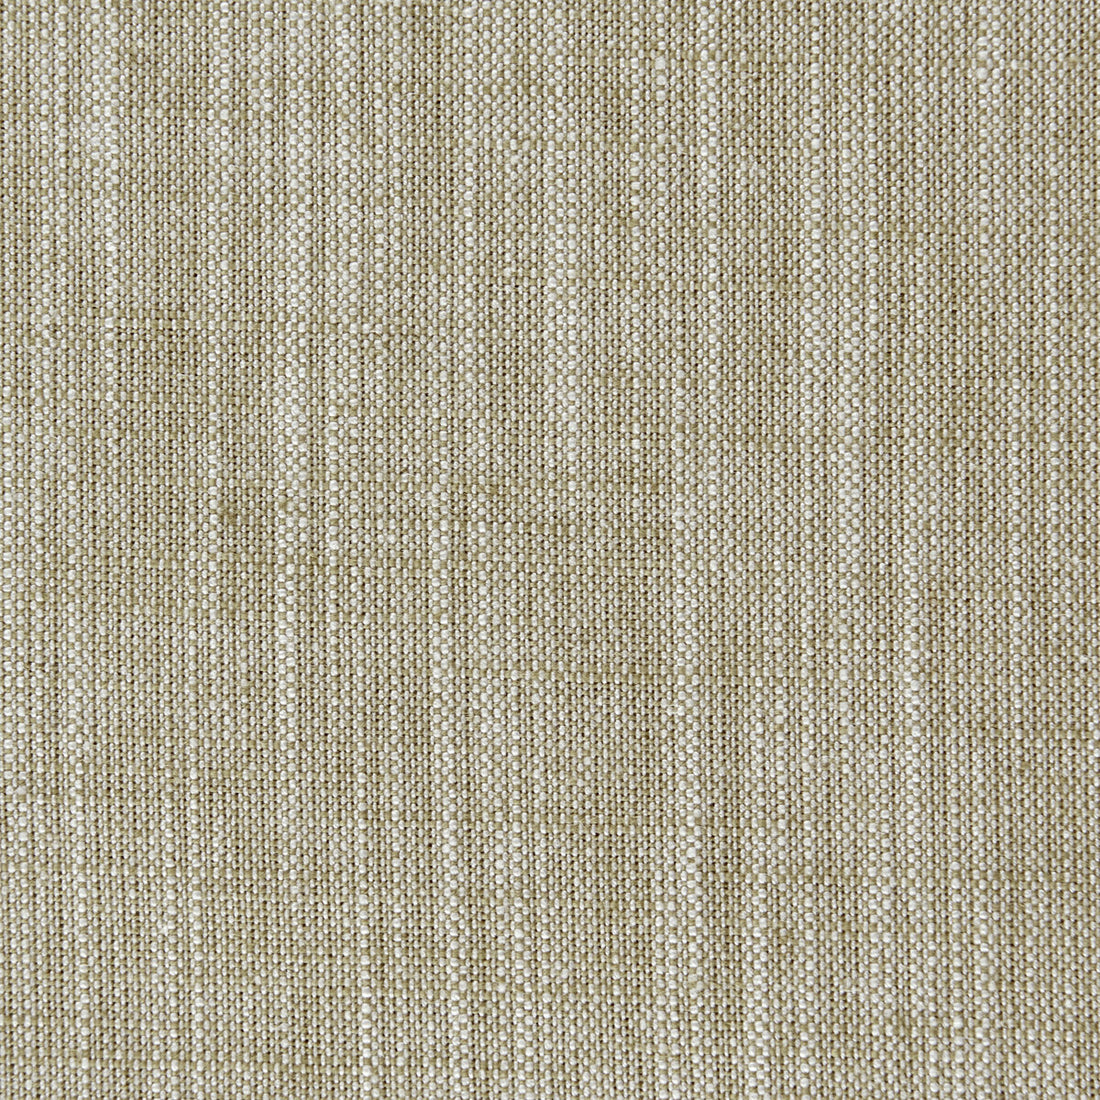 Biarritz fabric in hazel color - pattern F0965/19.CAC.0 - by Clarke And Clarke in the Clarke &amp; Clarke Biarritz collection